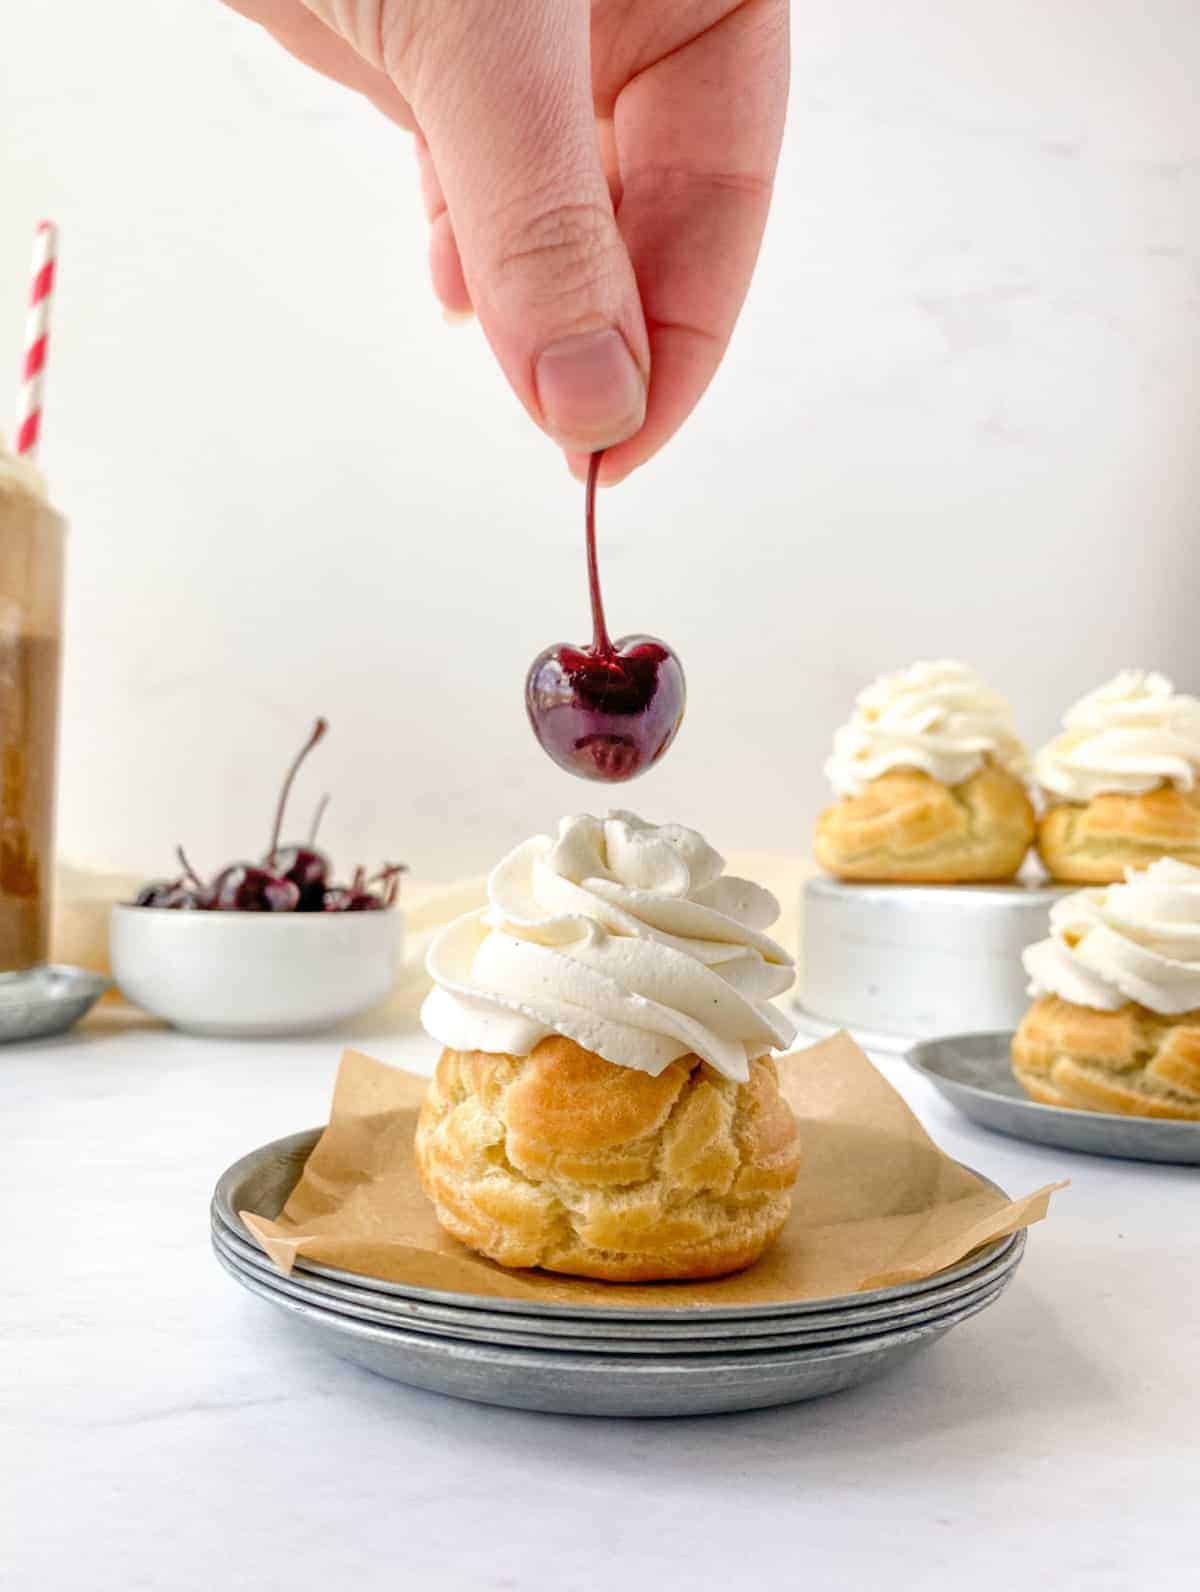 A hand placing a cherry on top of a Root Beer Float Cream Puff with more cream puffs and cherries in the background